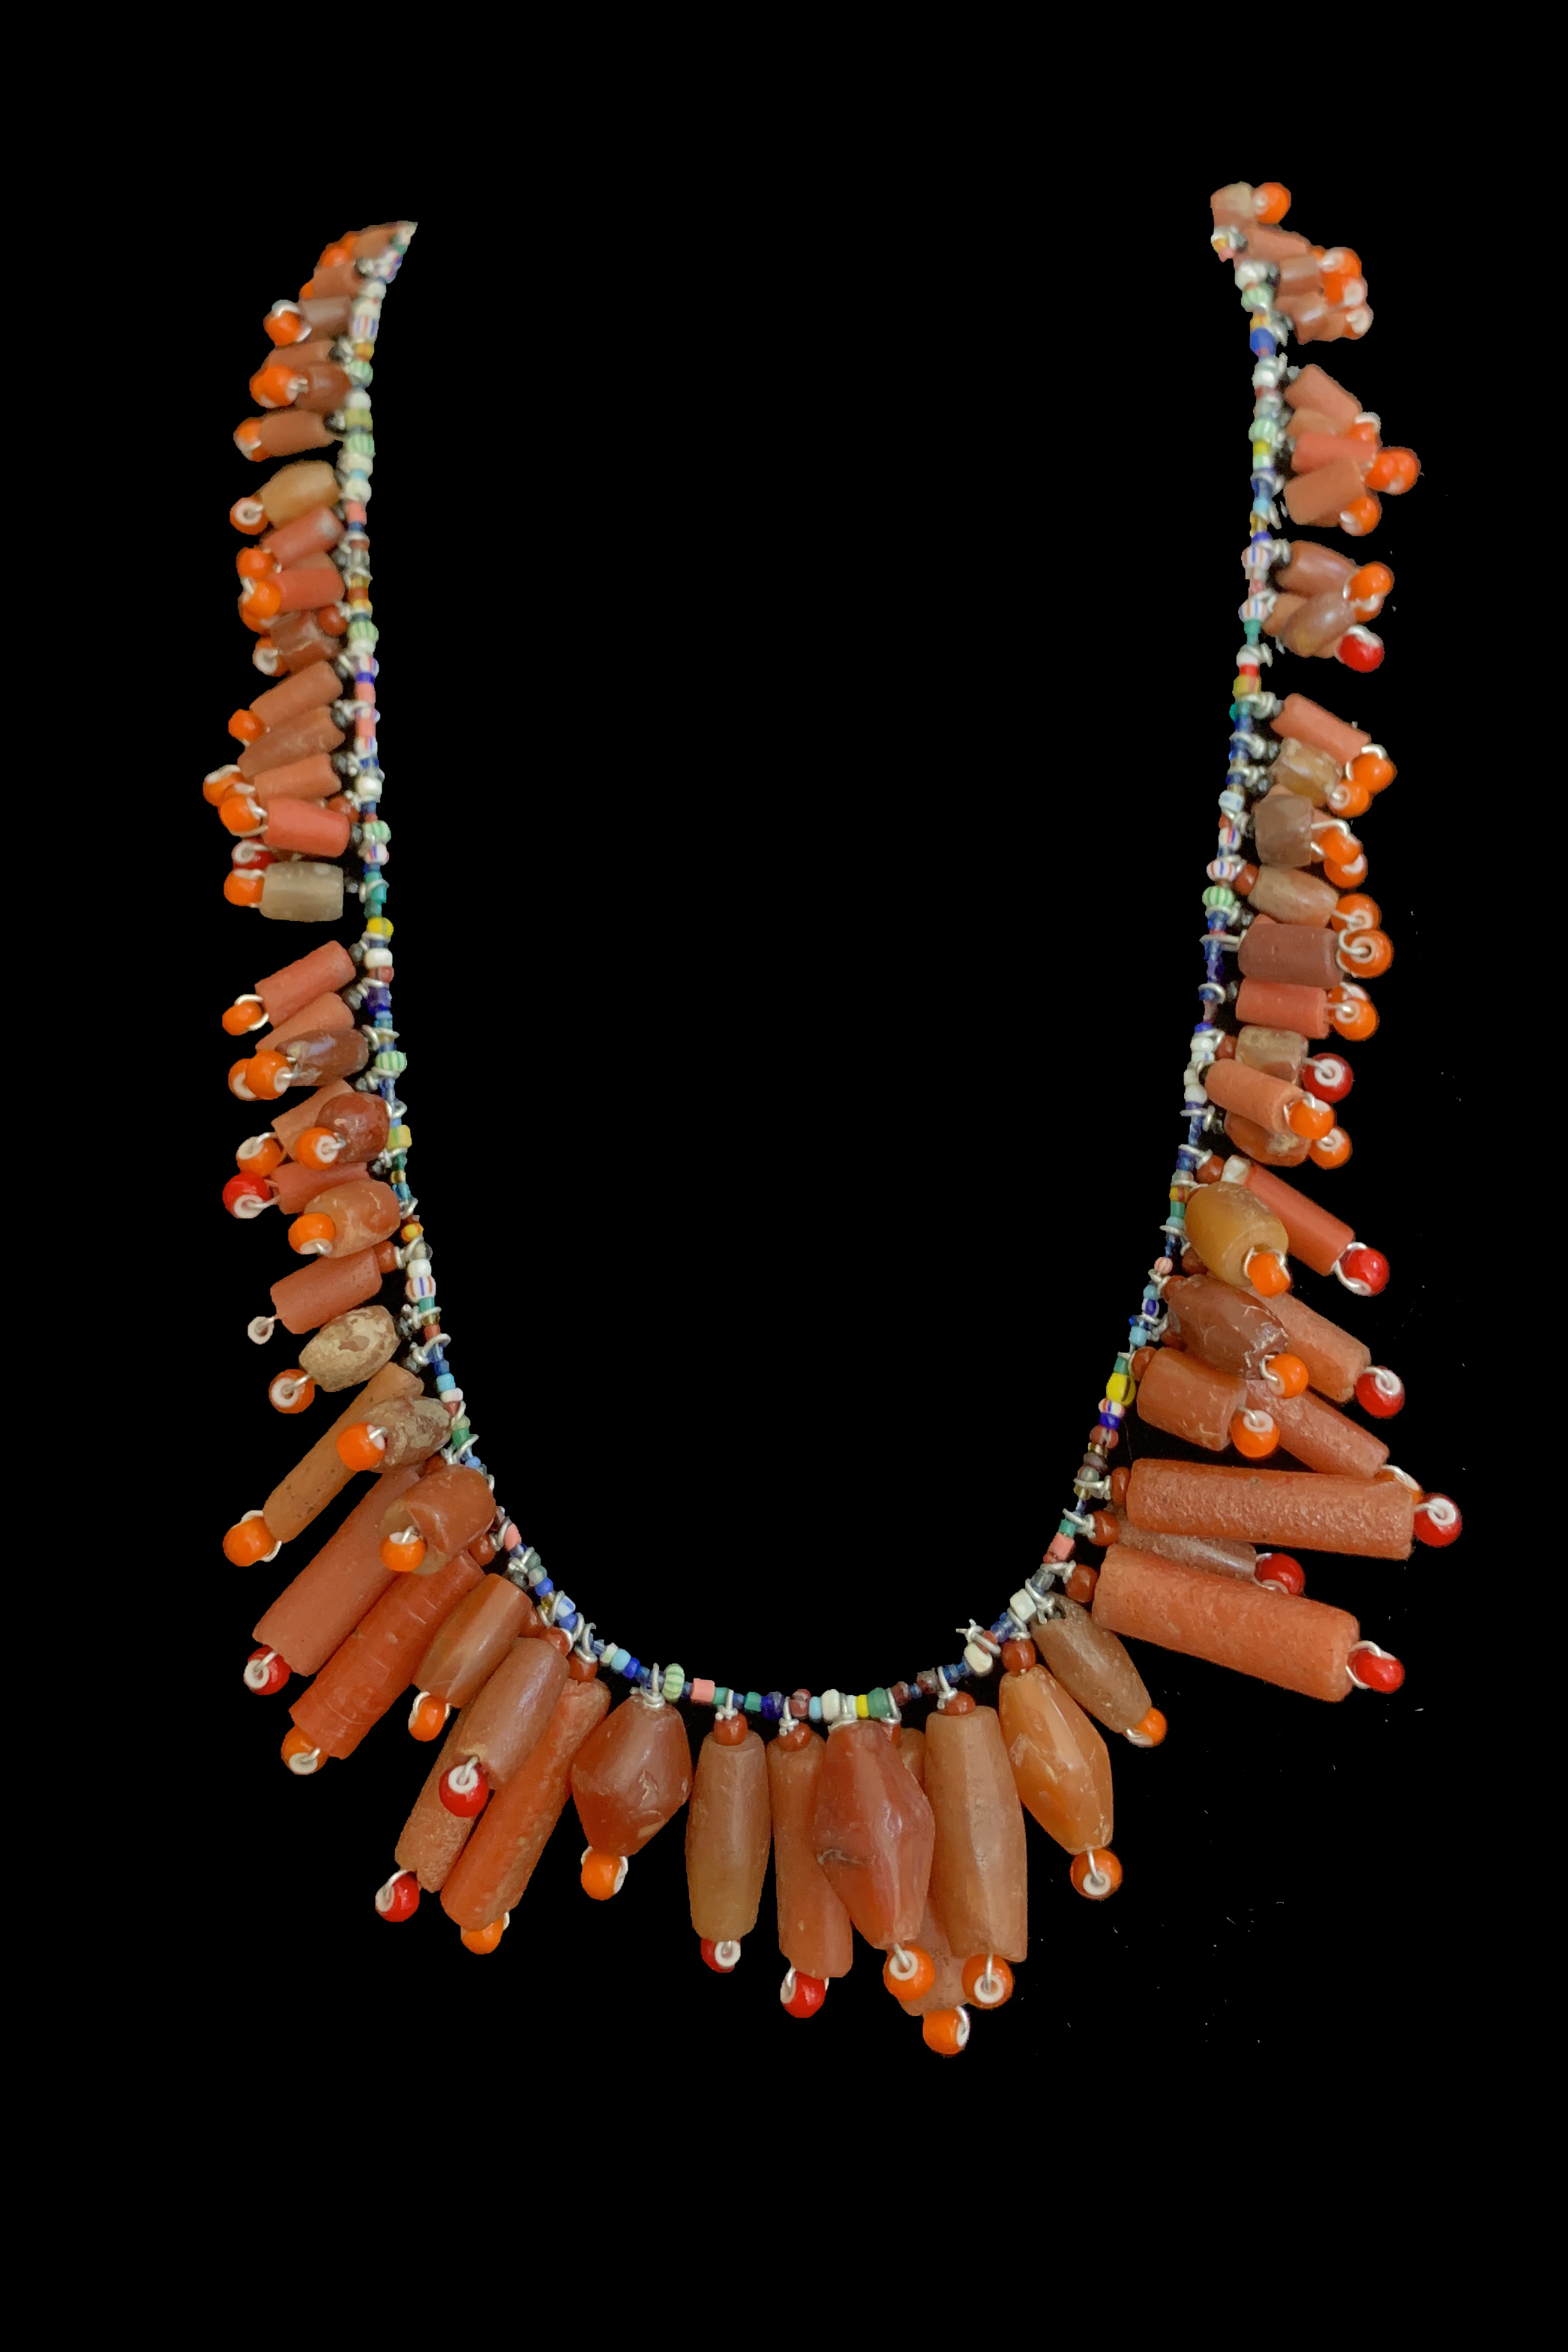 Carnelian/Agate Glass and White Heart Beads Necklace